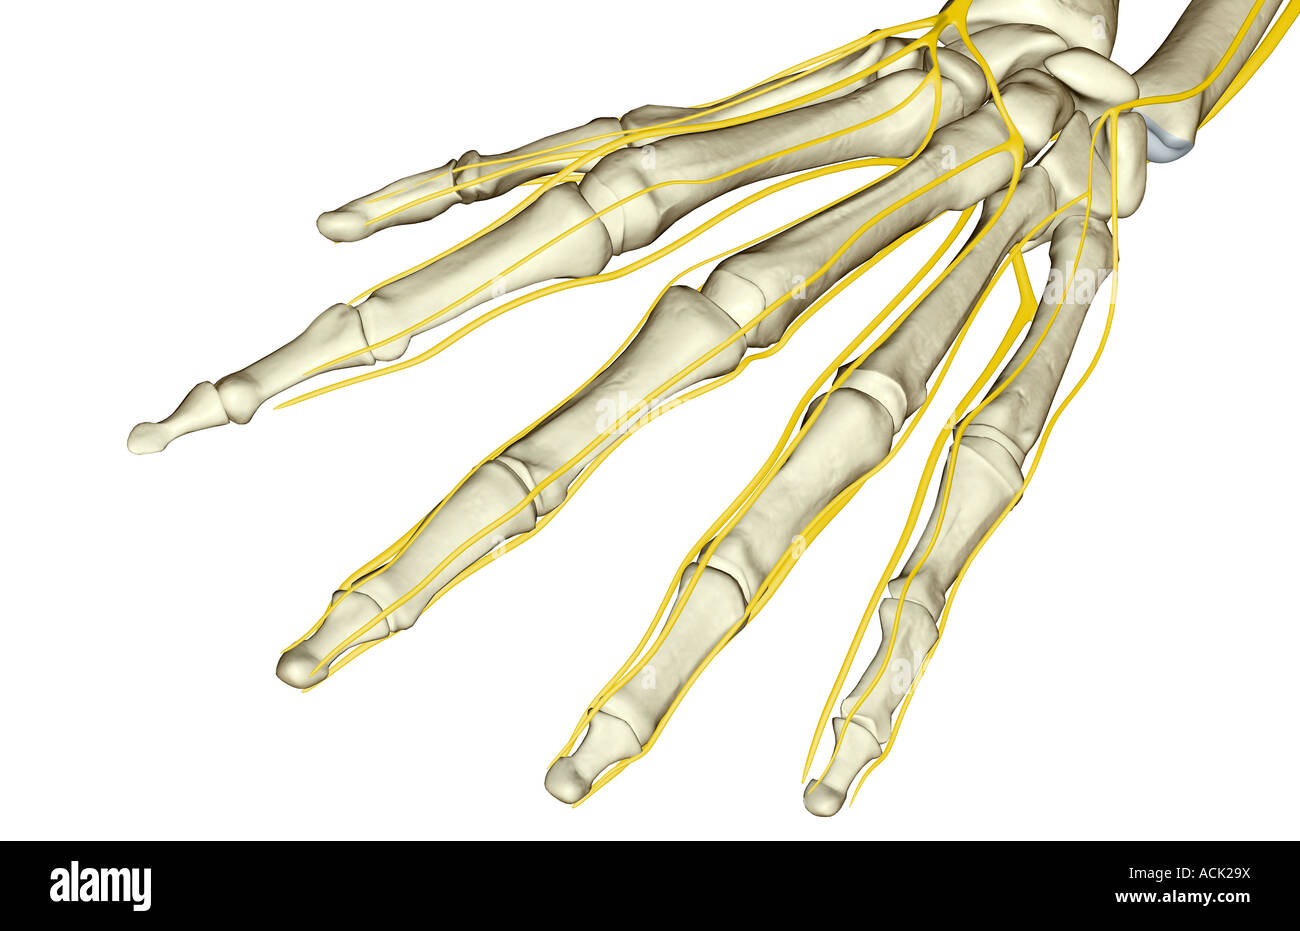 Radial Nerve High Resolution Stock Photography and Images - Alamy